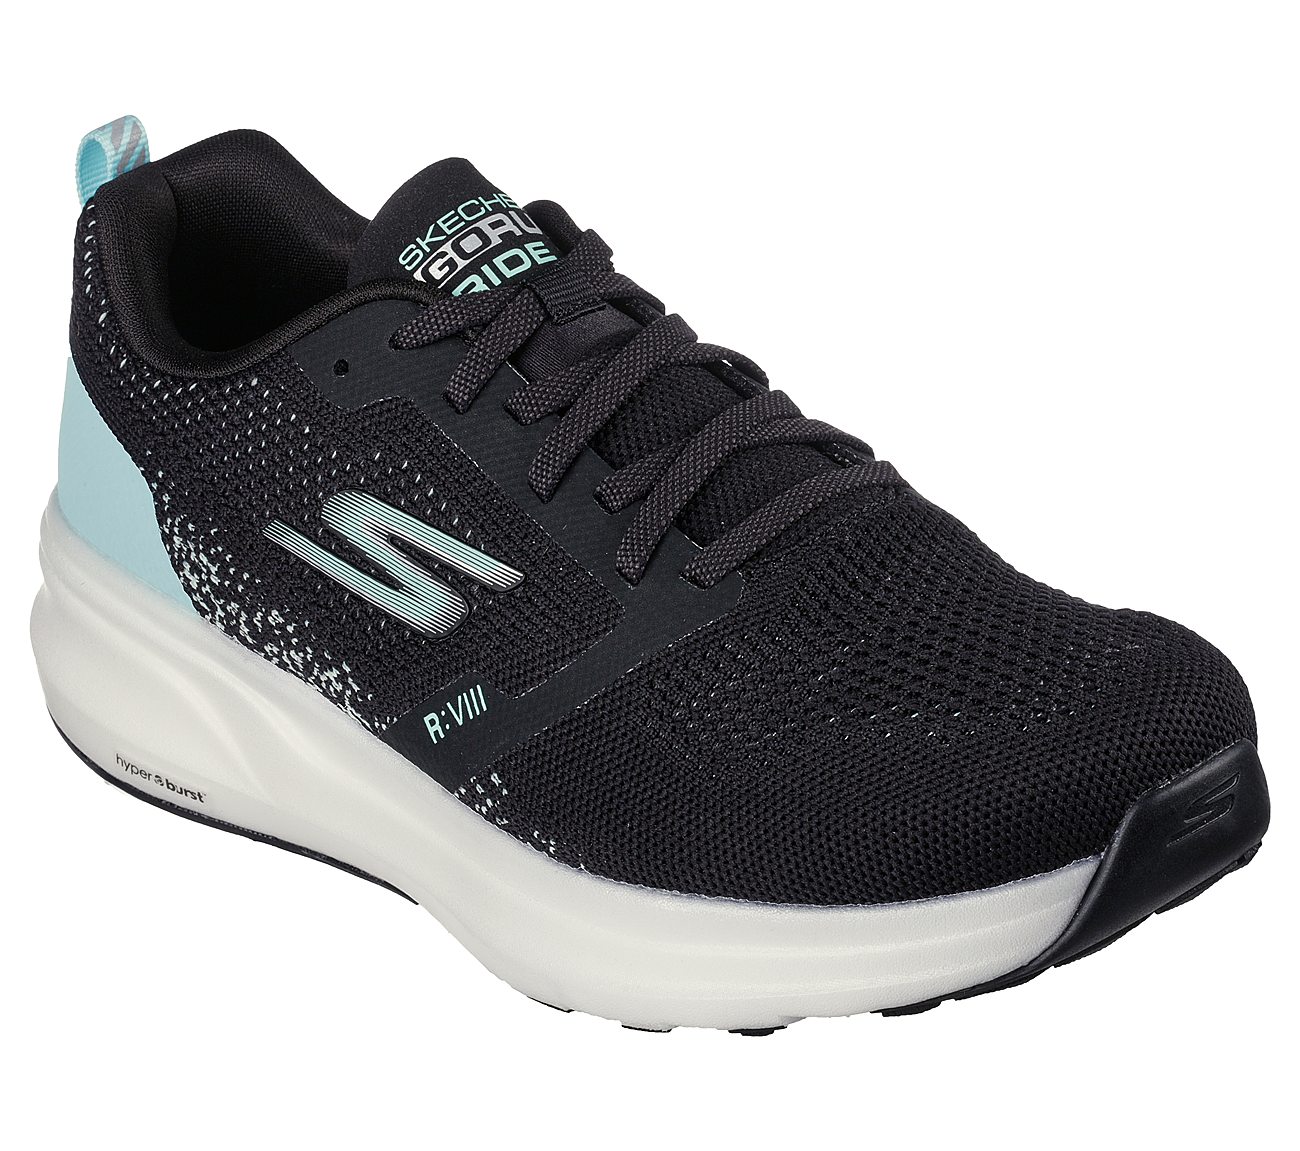 GO RUN RIDE 8, BLACK/TURQUOISE Footwear Lateral View